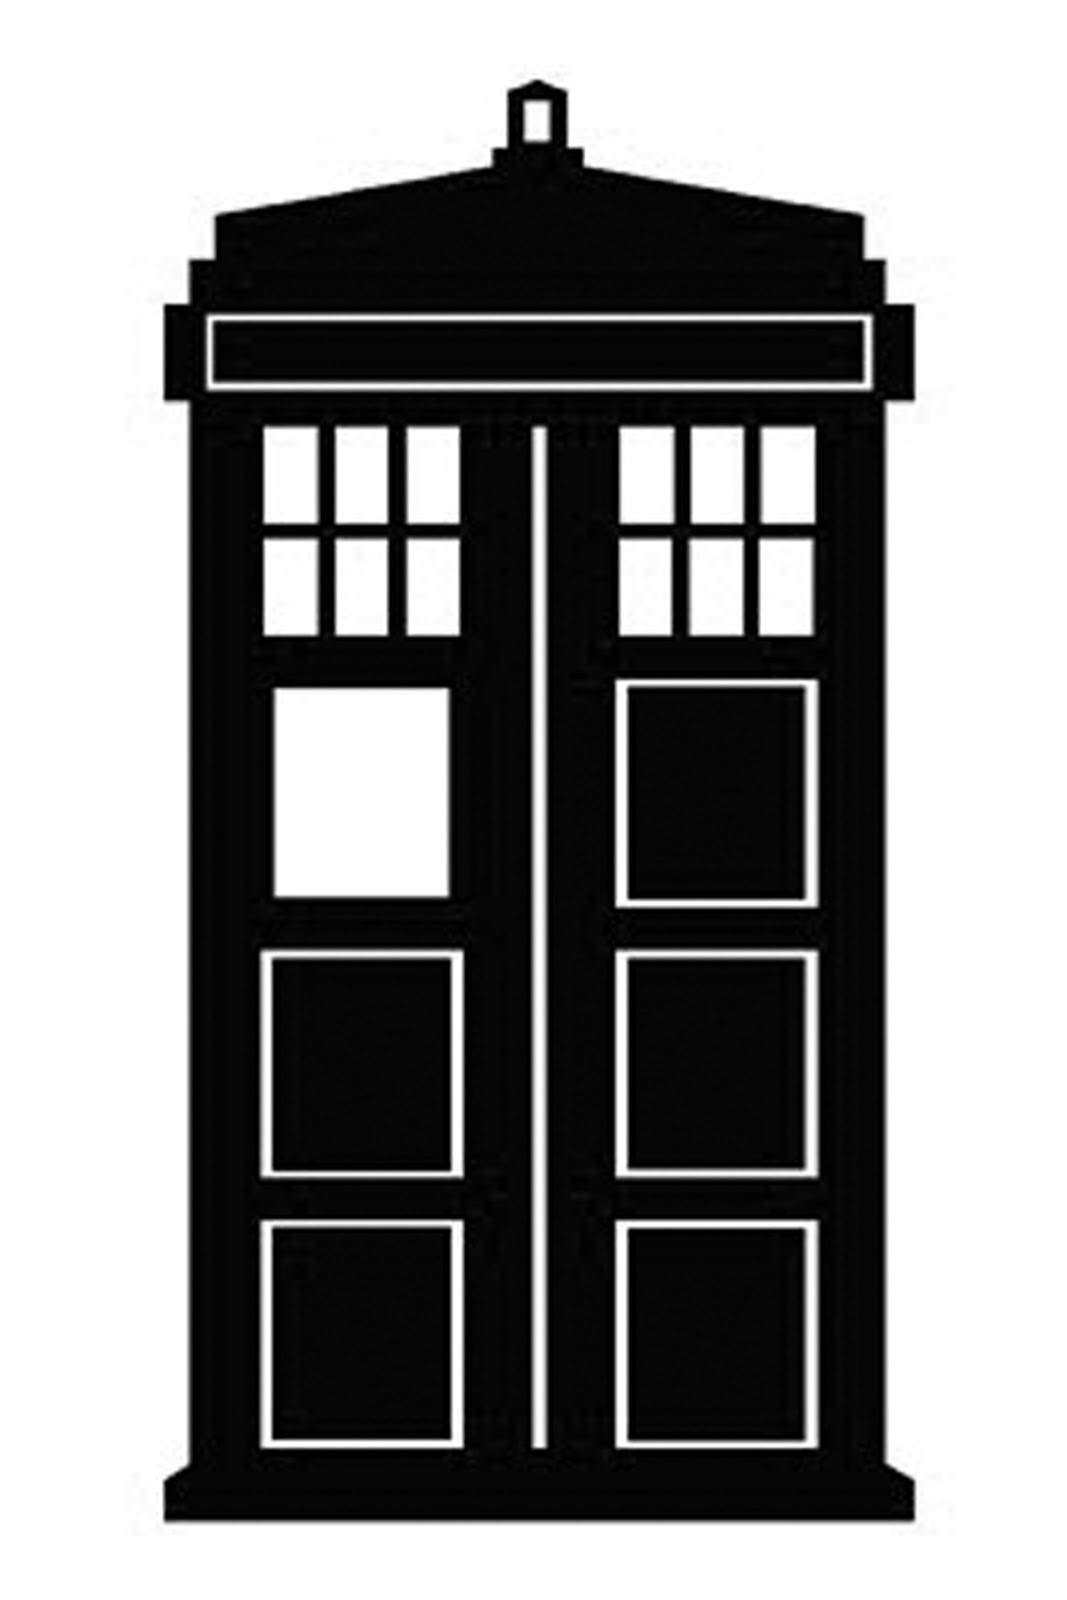 Doodlecraft: Doctor Who Stencil Silhouette Outline Clipart Mania!